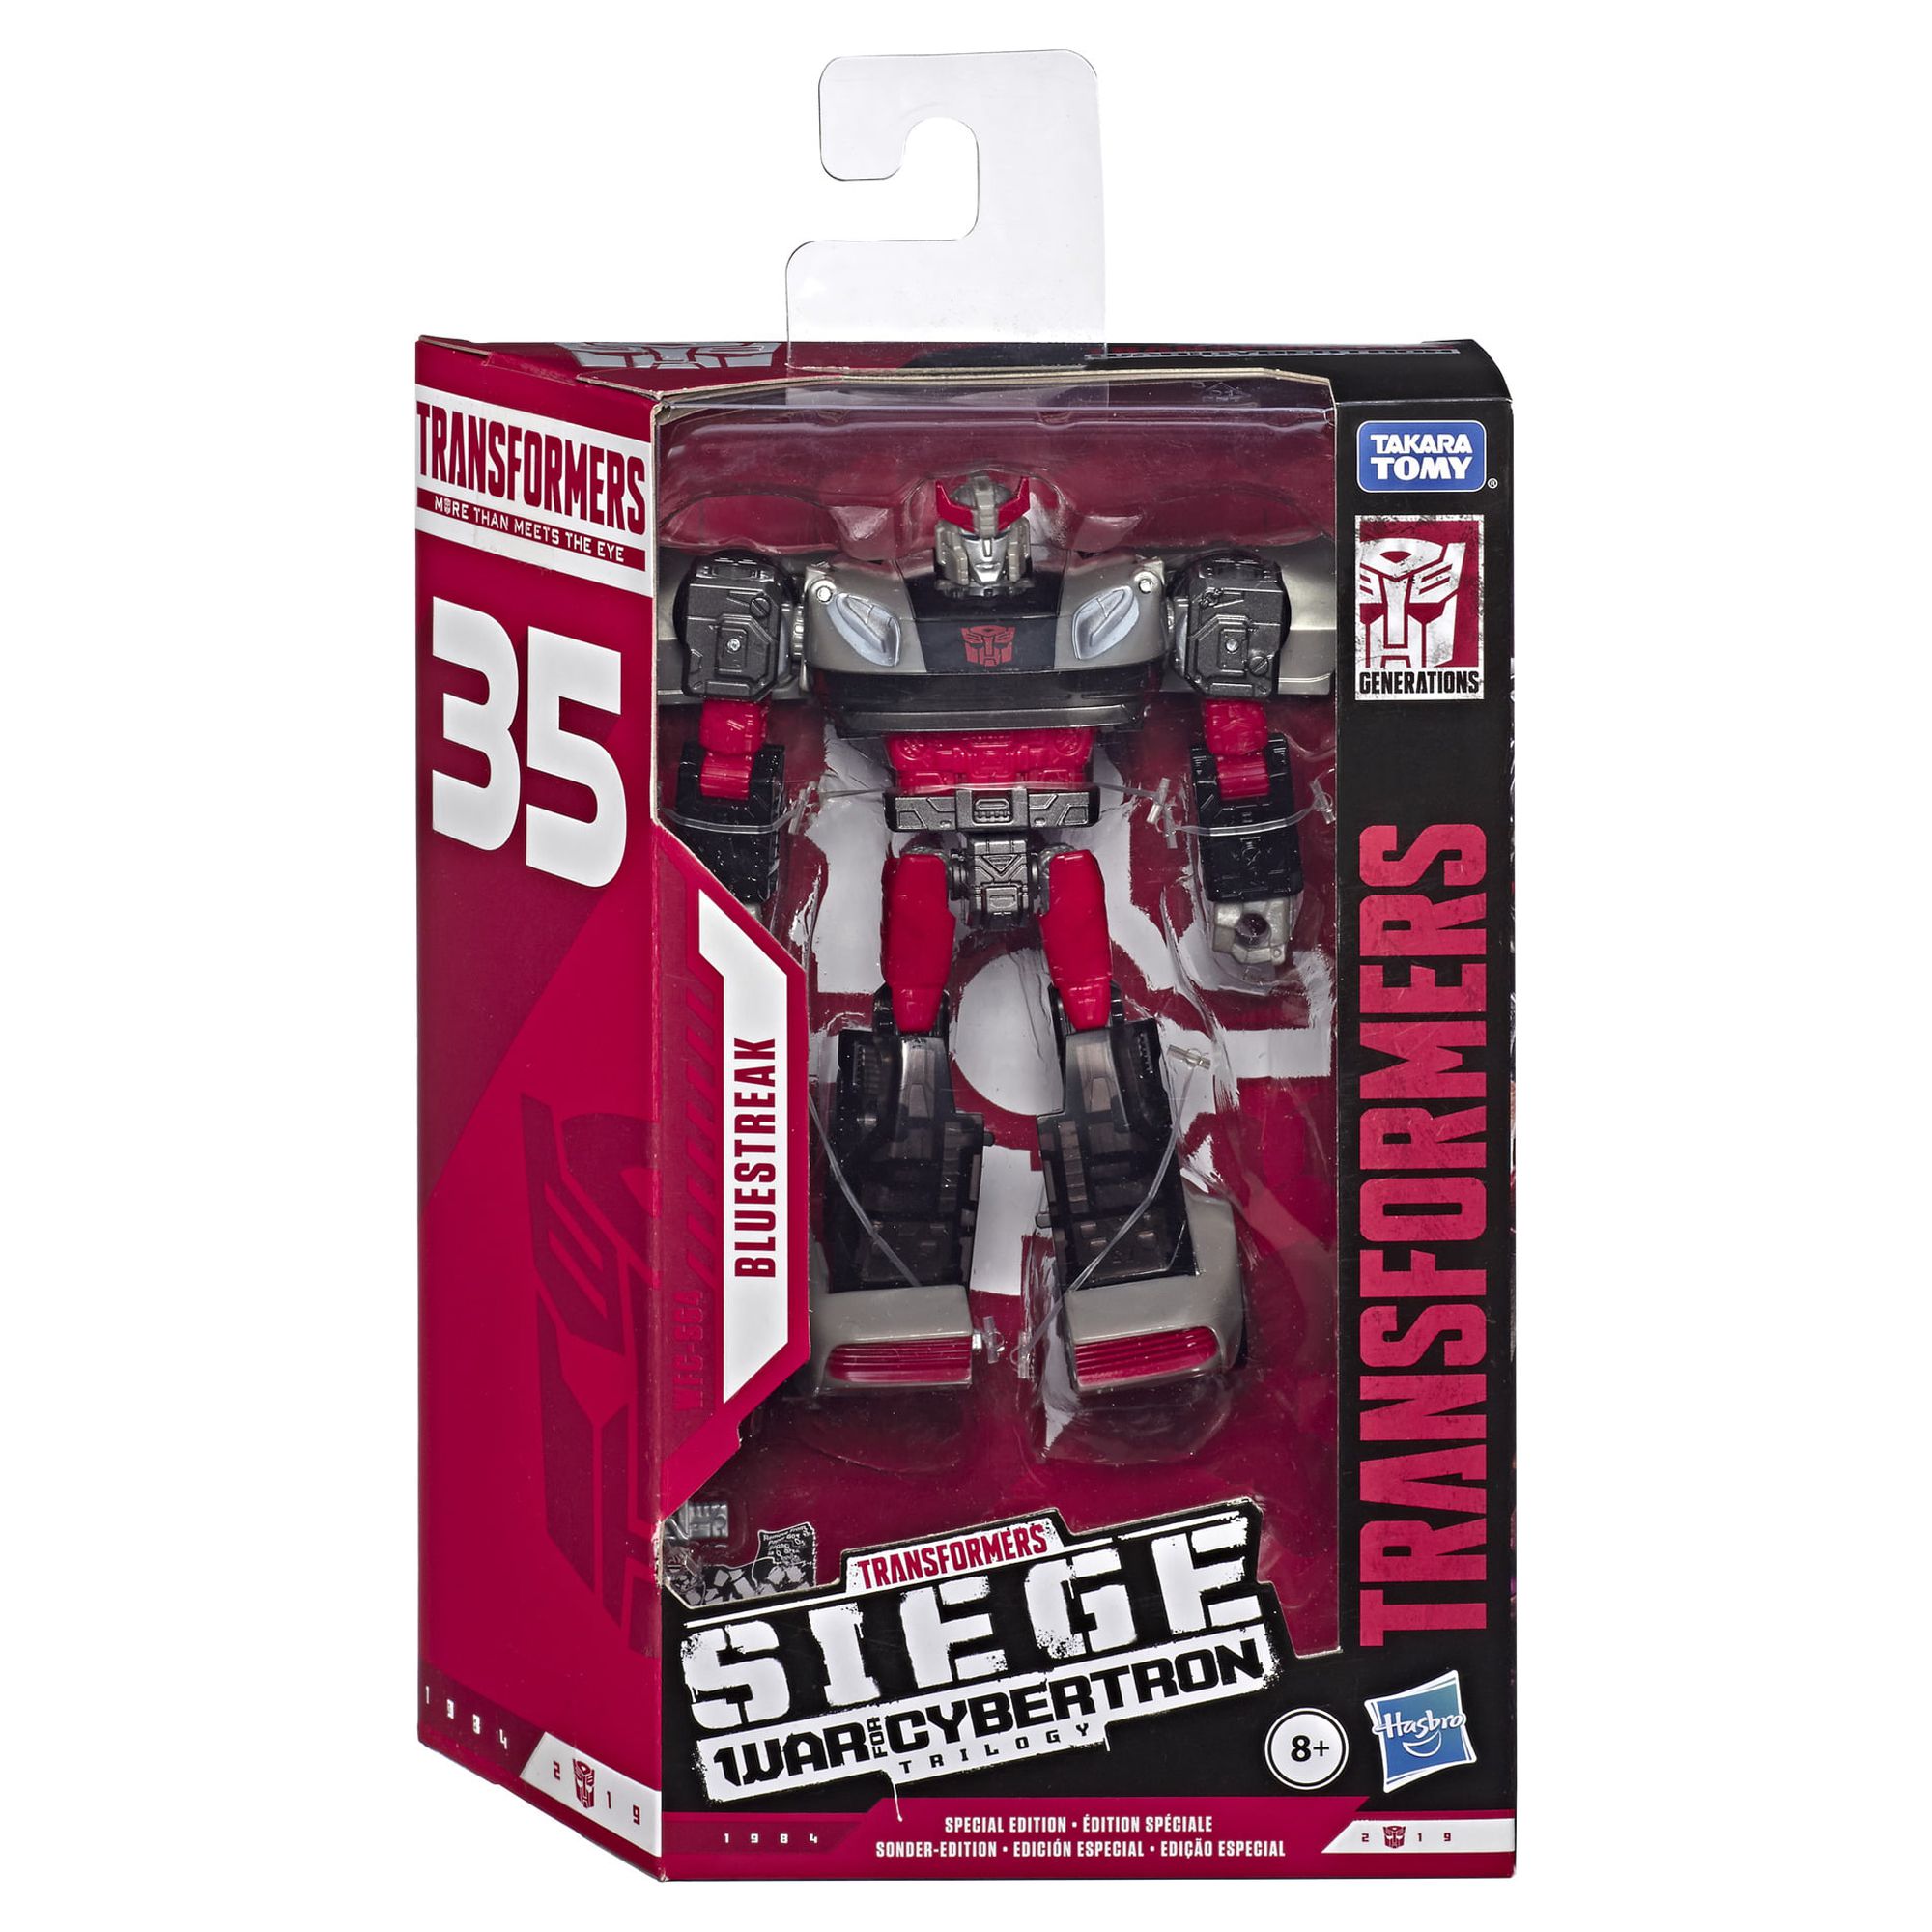 Transformers: Siege War for Cybertron Bluestreak Kids Toy Action Figure for Boys and Girls (4”) - image 3 of 10